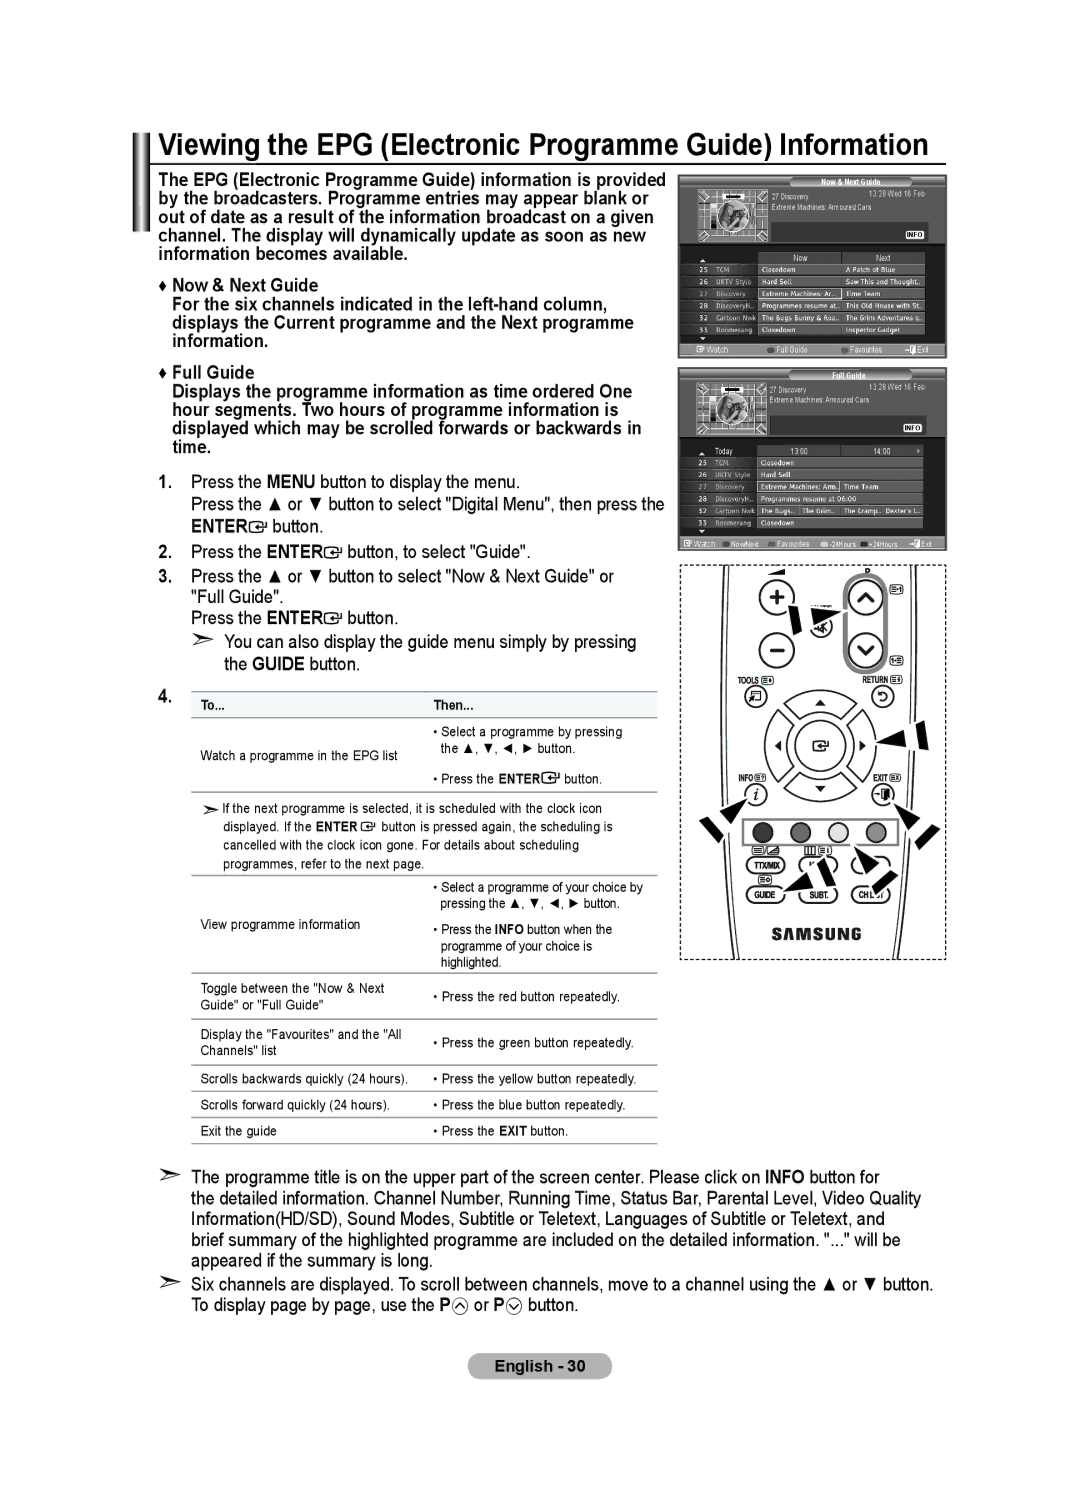 Samsung LE22A455C1D user manual Viewing the EPG Electronic Programme Guide Information, Then 